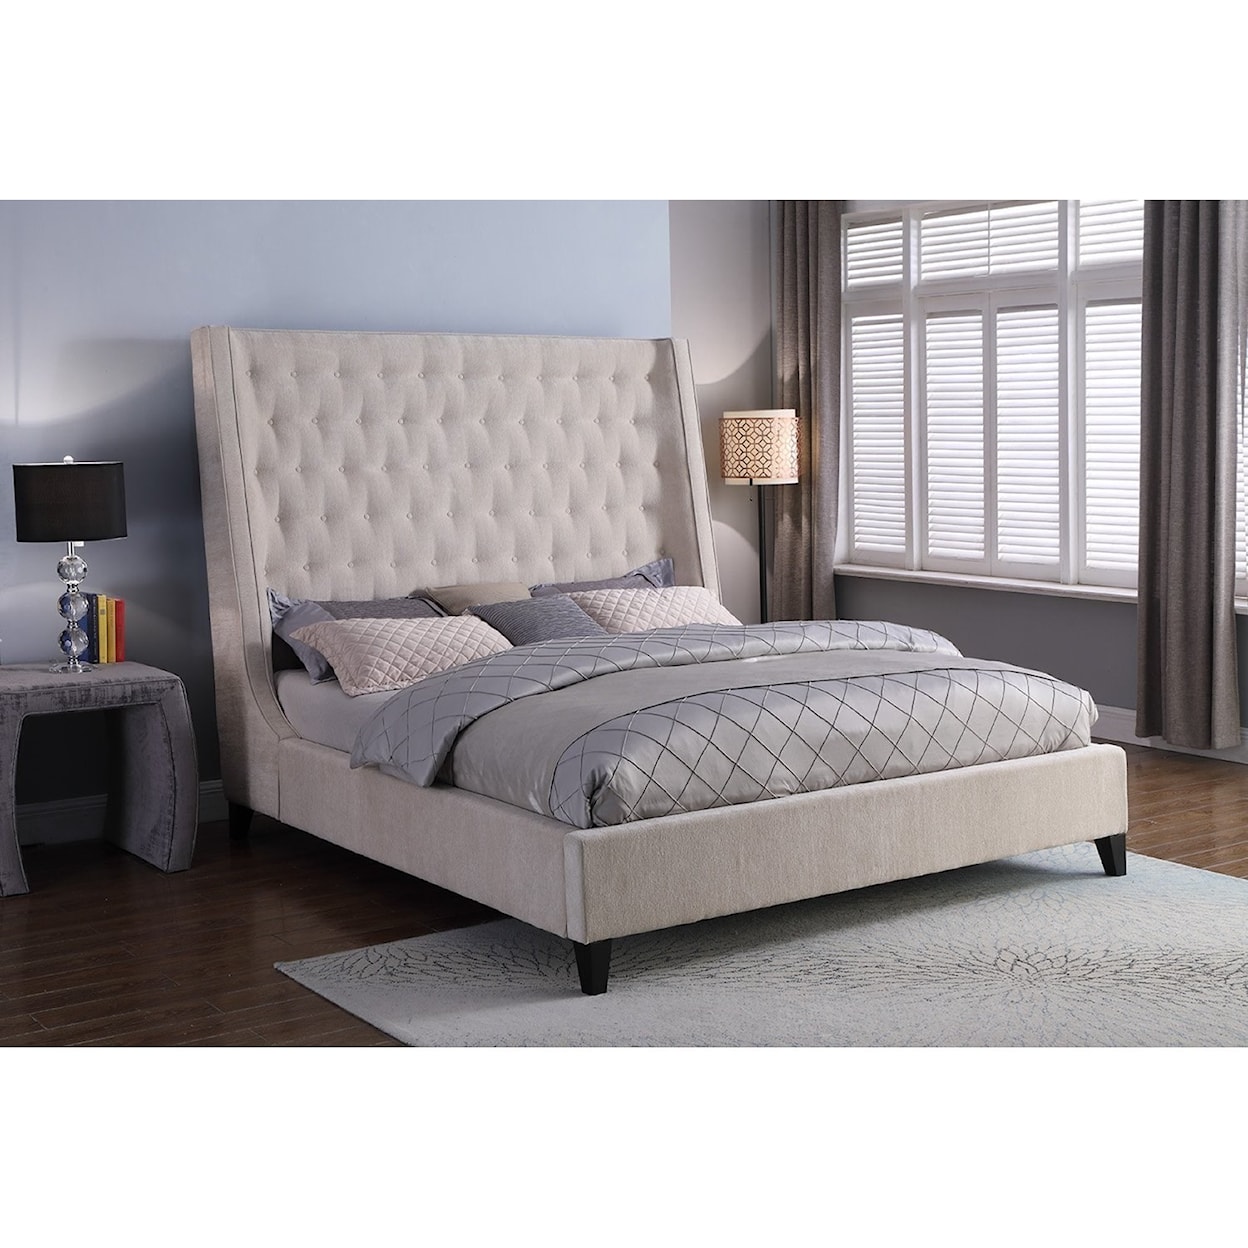 Paramount Living Elaina Queen Upholstered Bed